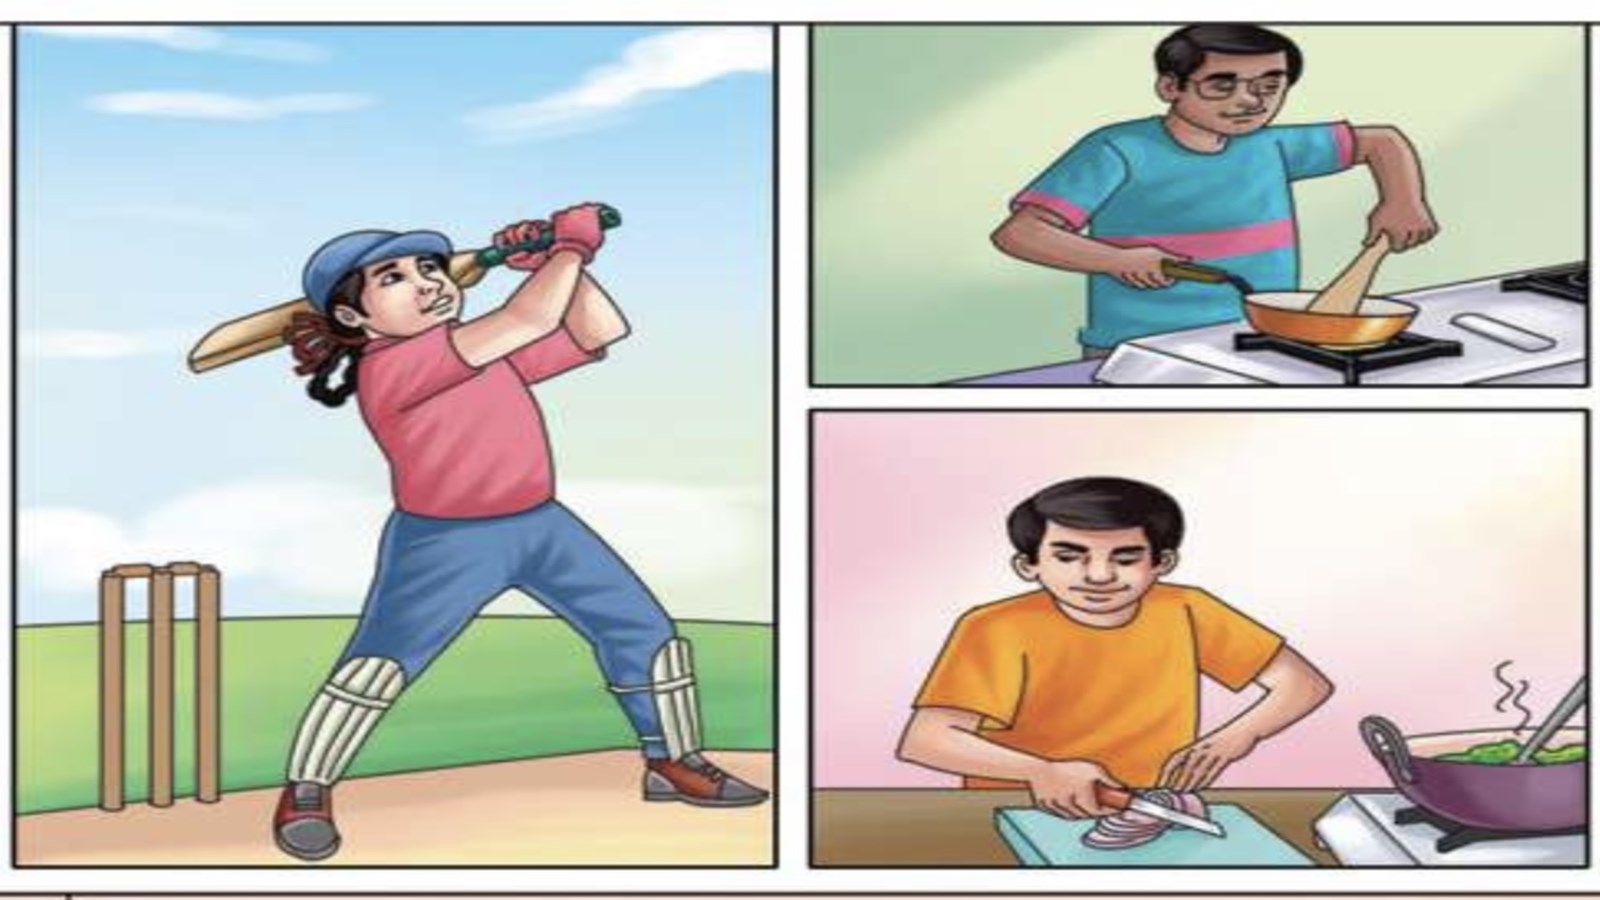 android, boys can cook, girls can play cricket, respect third gender: unesco, ncert new comic book for schoolchildren breaks stereotypes